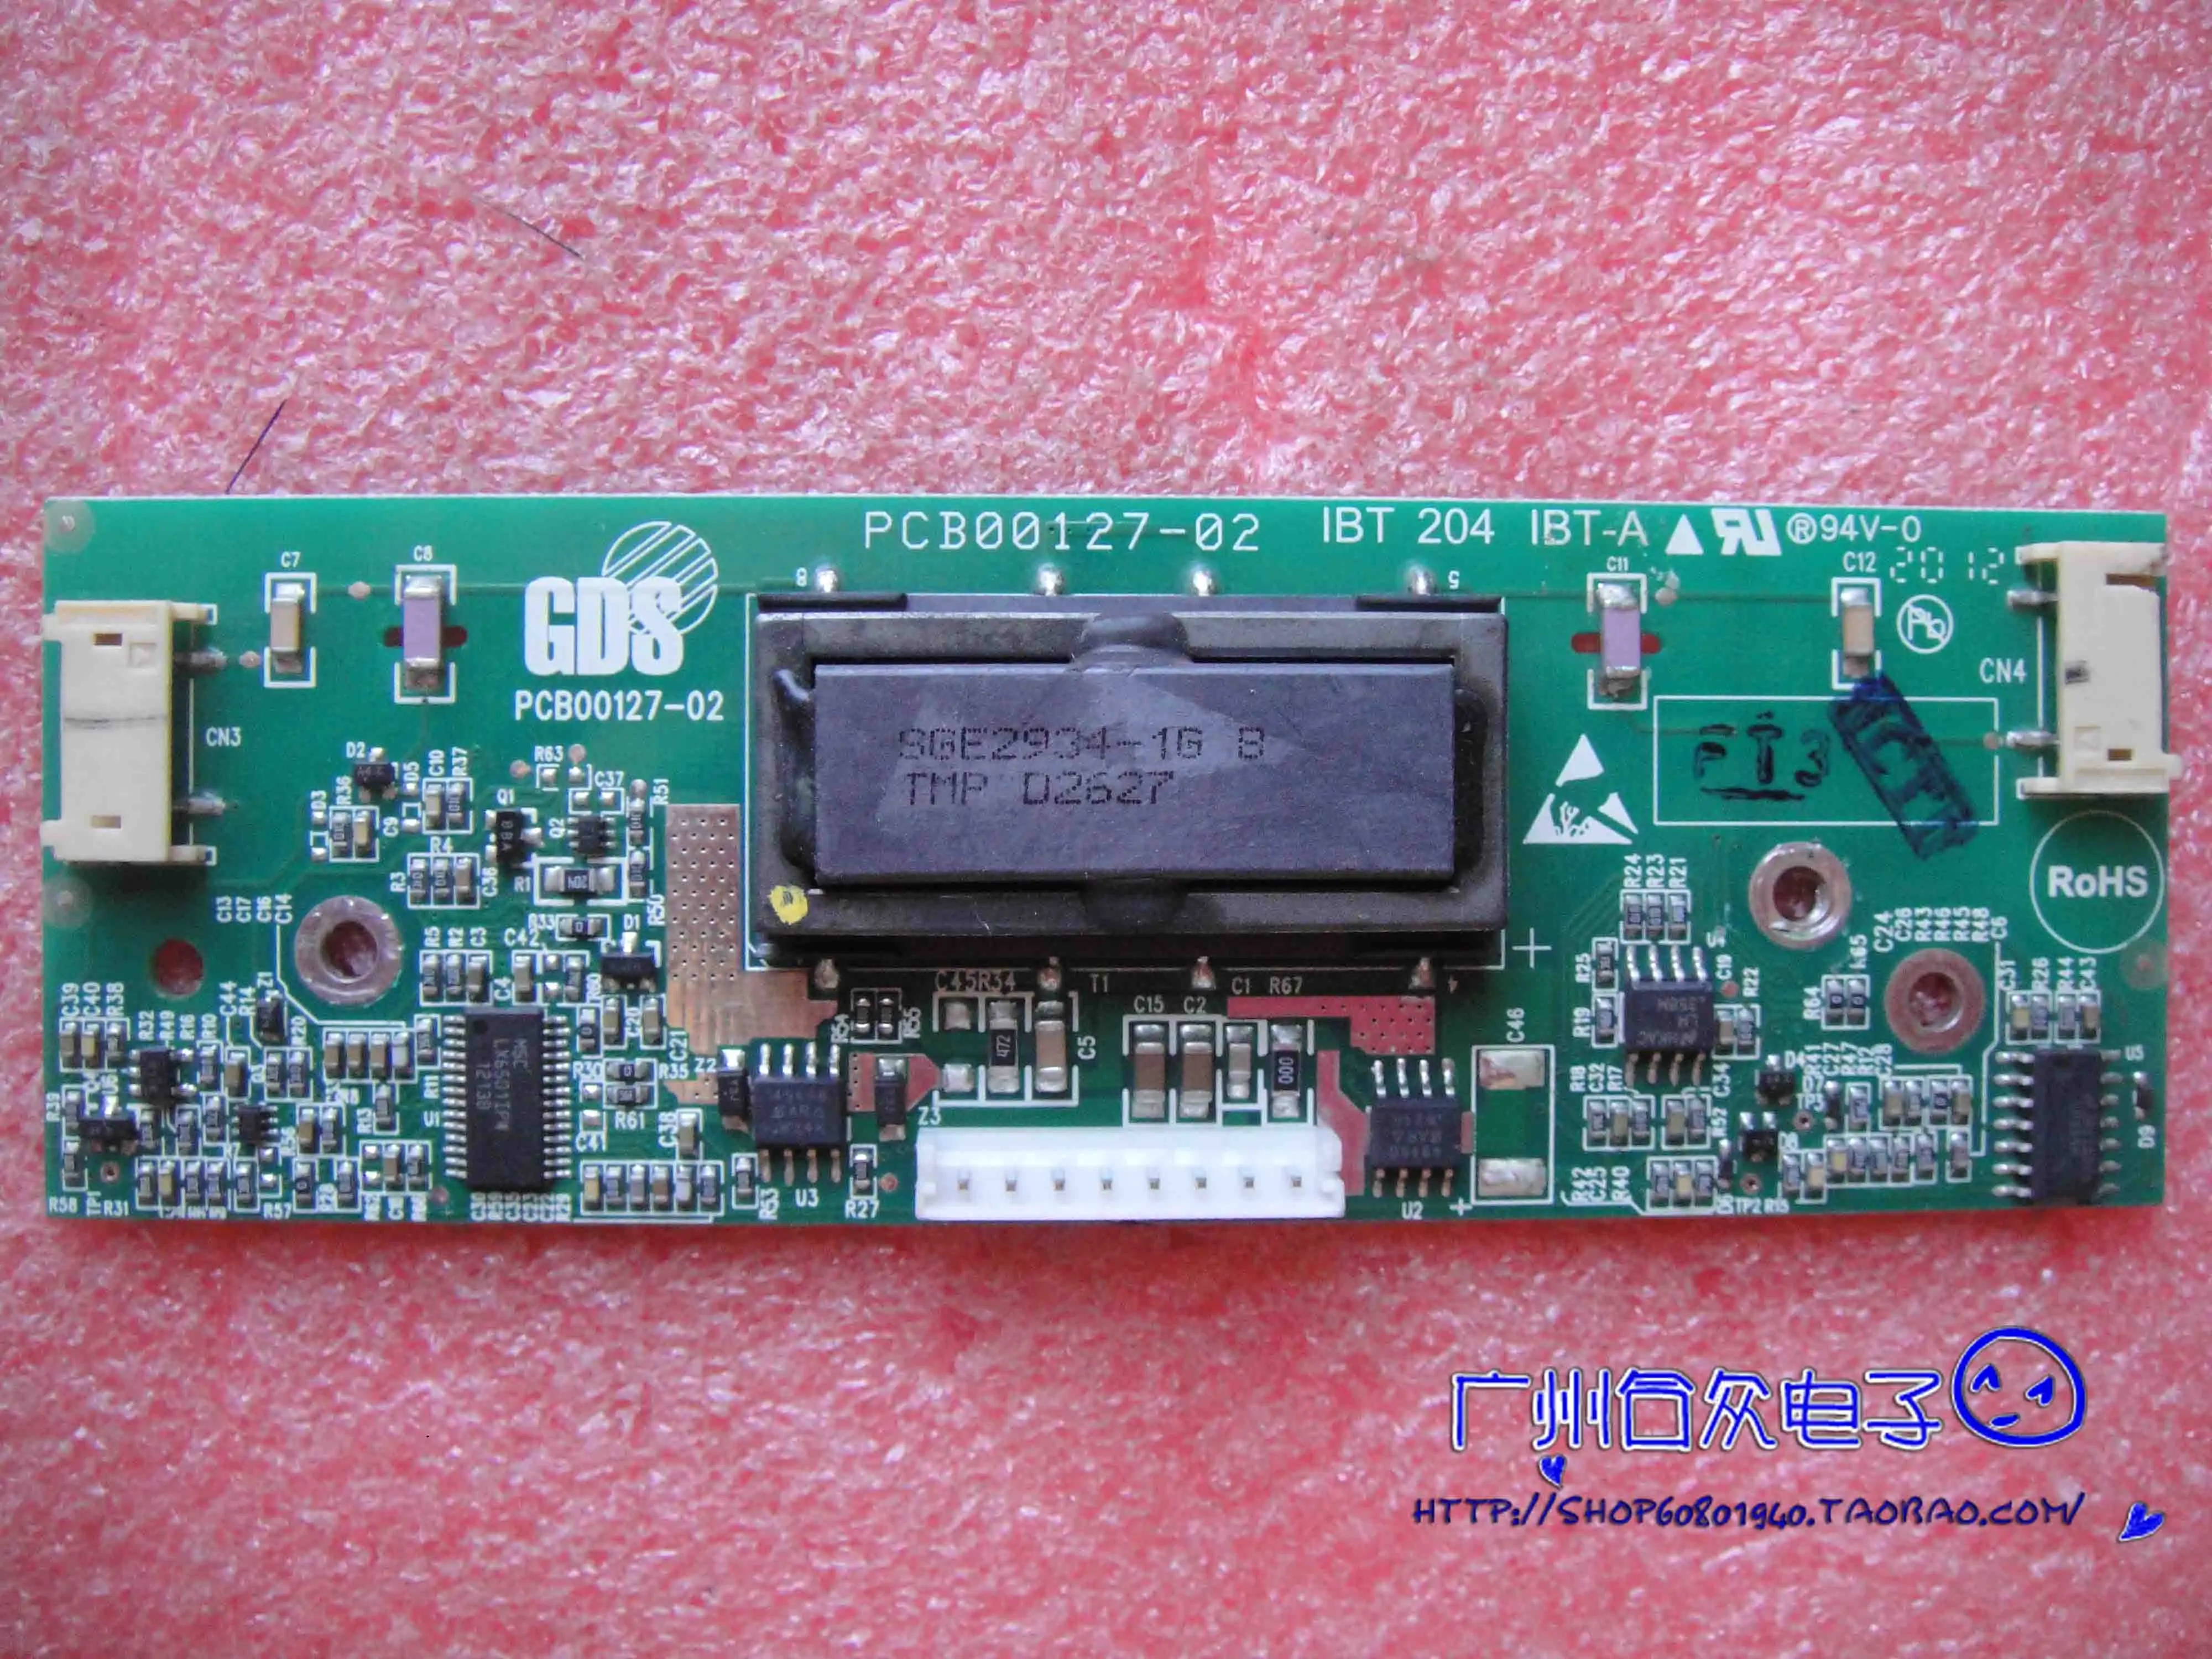 

LCD Inverters PCB00127-02 IBT 204 IBT-A High Voltage Strip